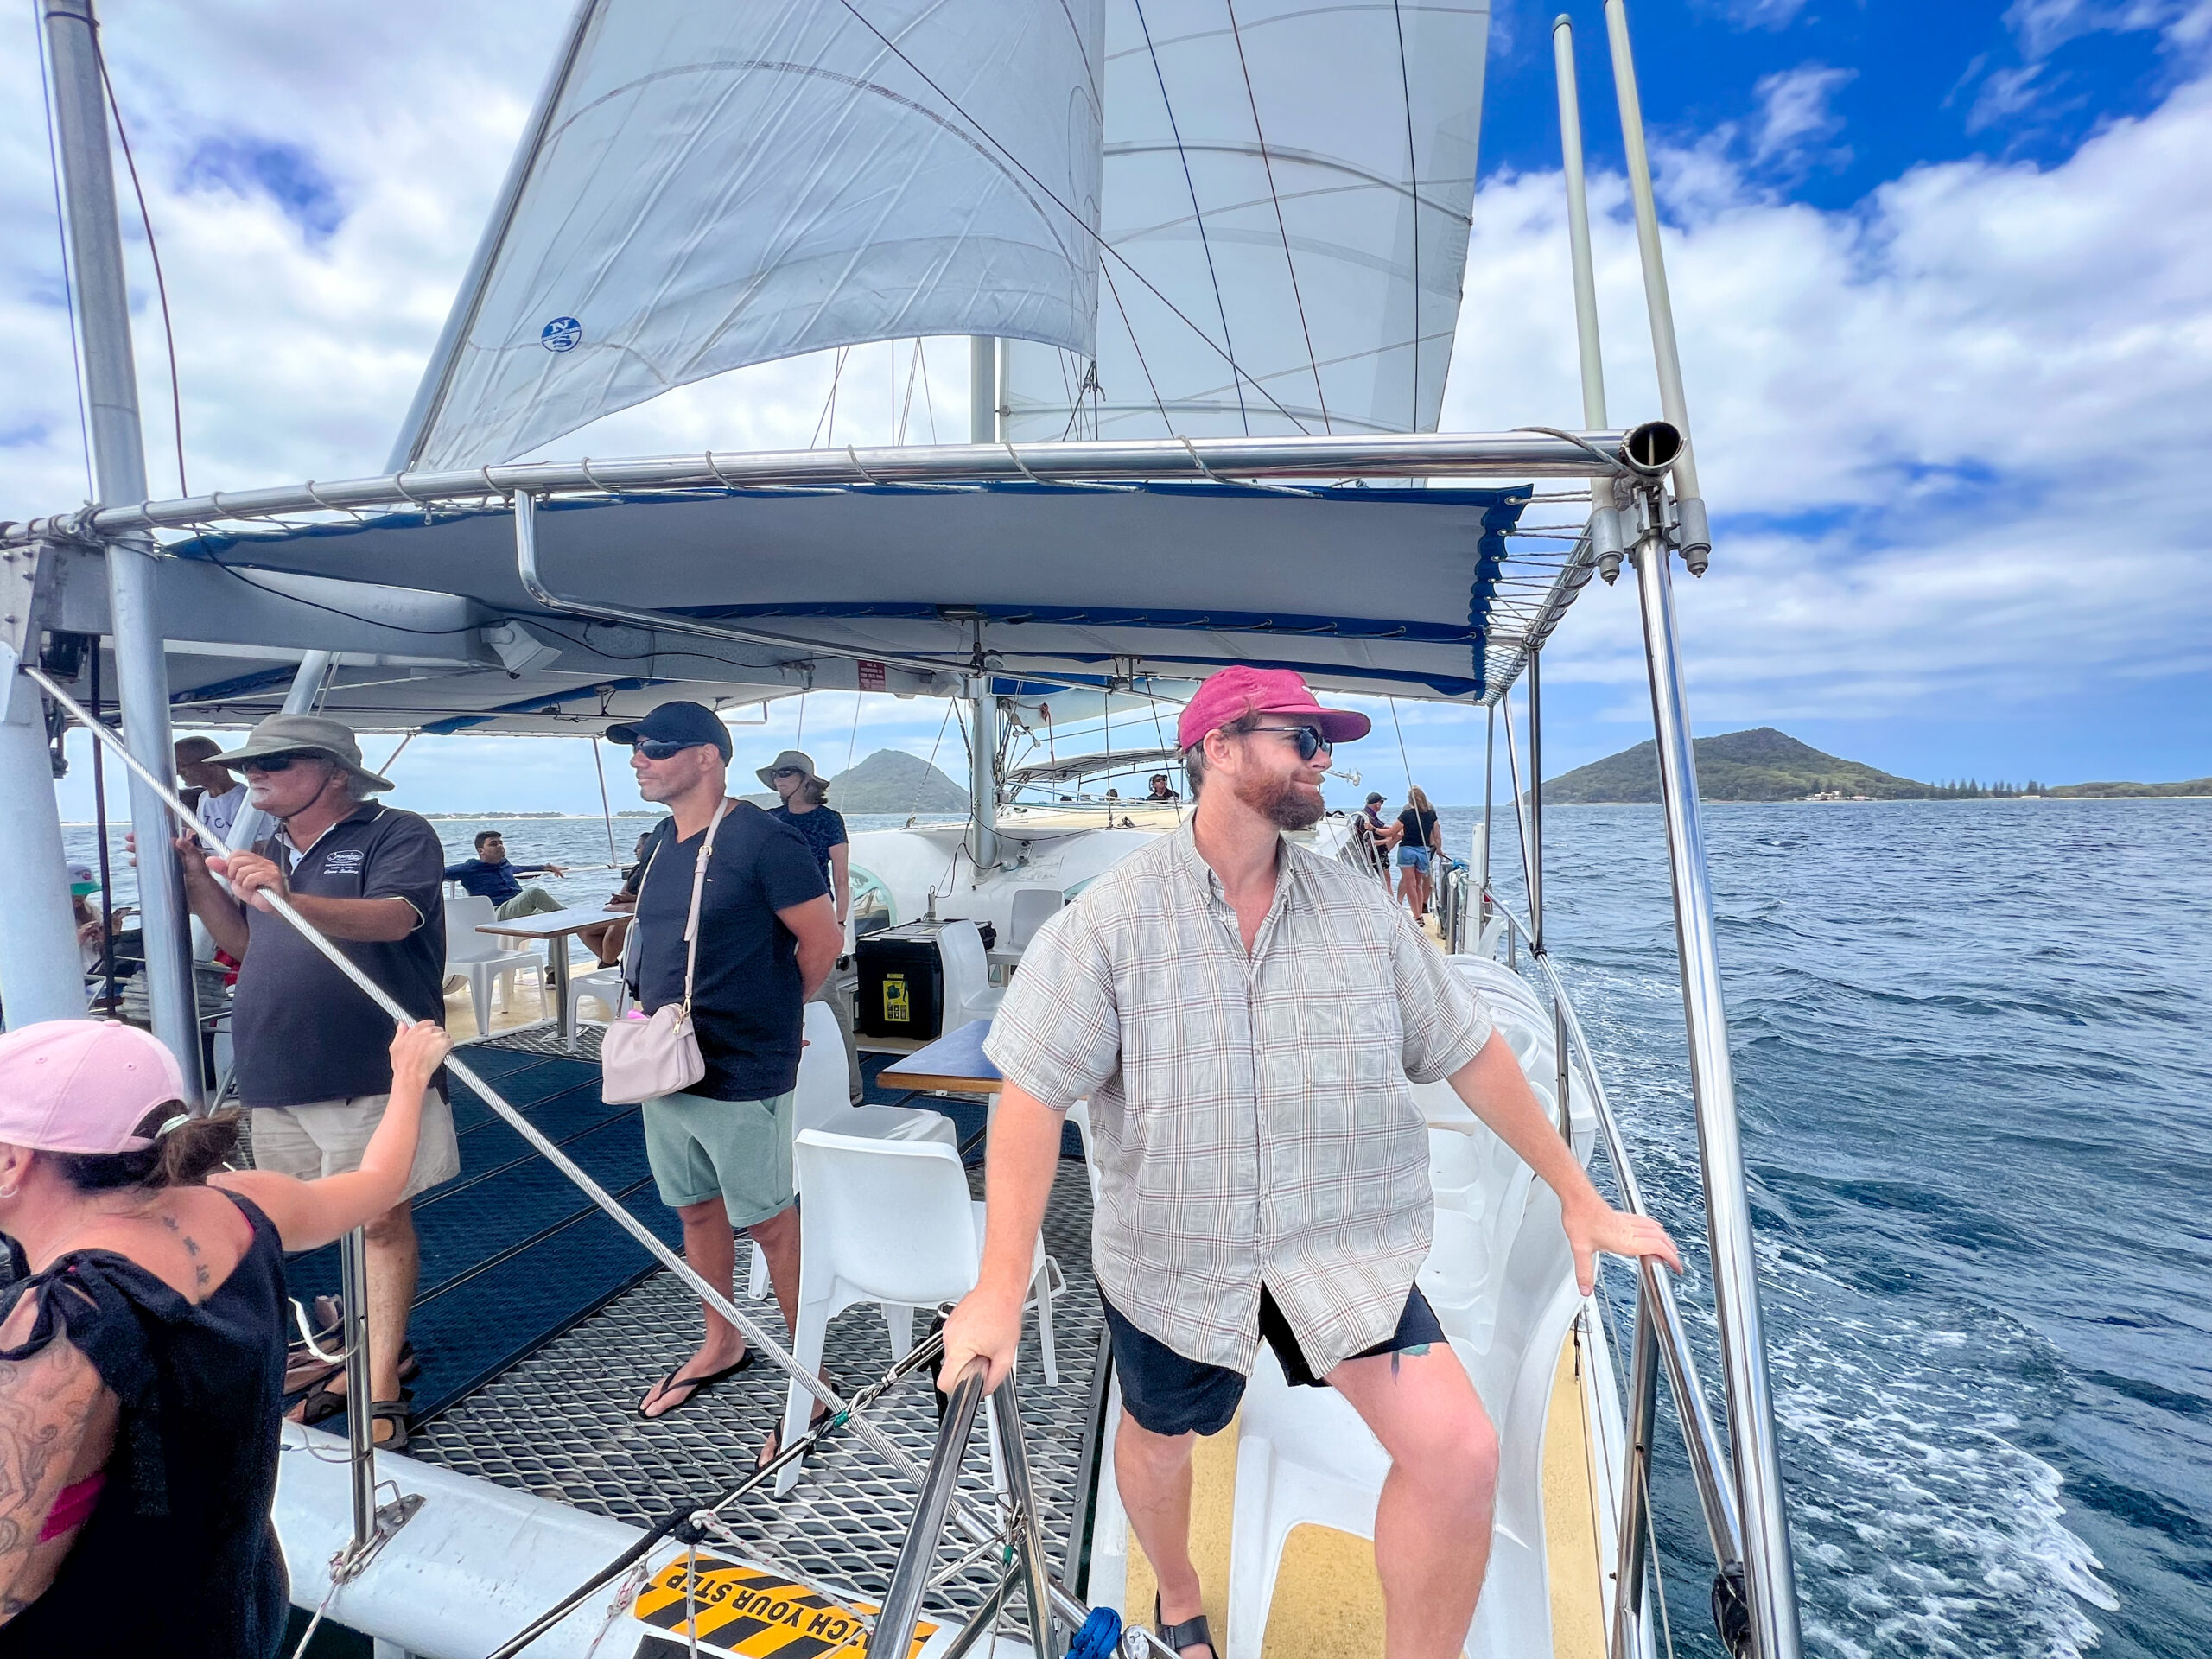 Port Stephens day tour, departing Newcastle